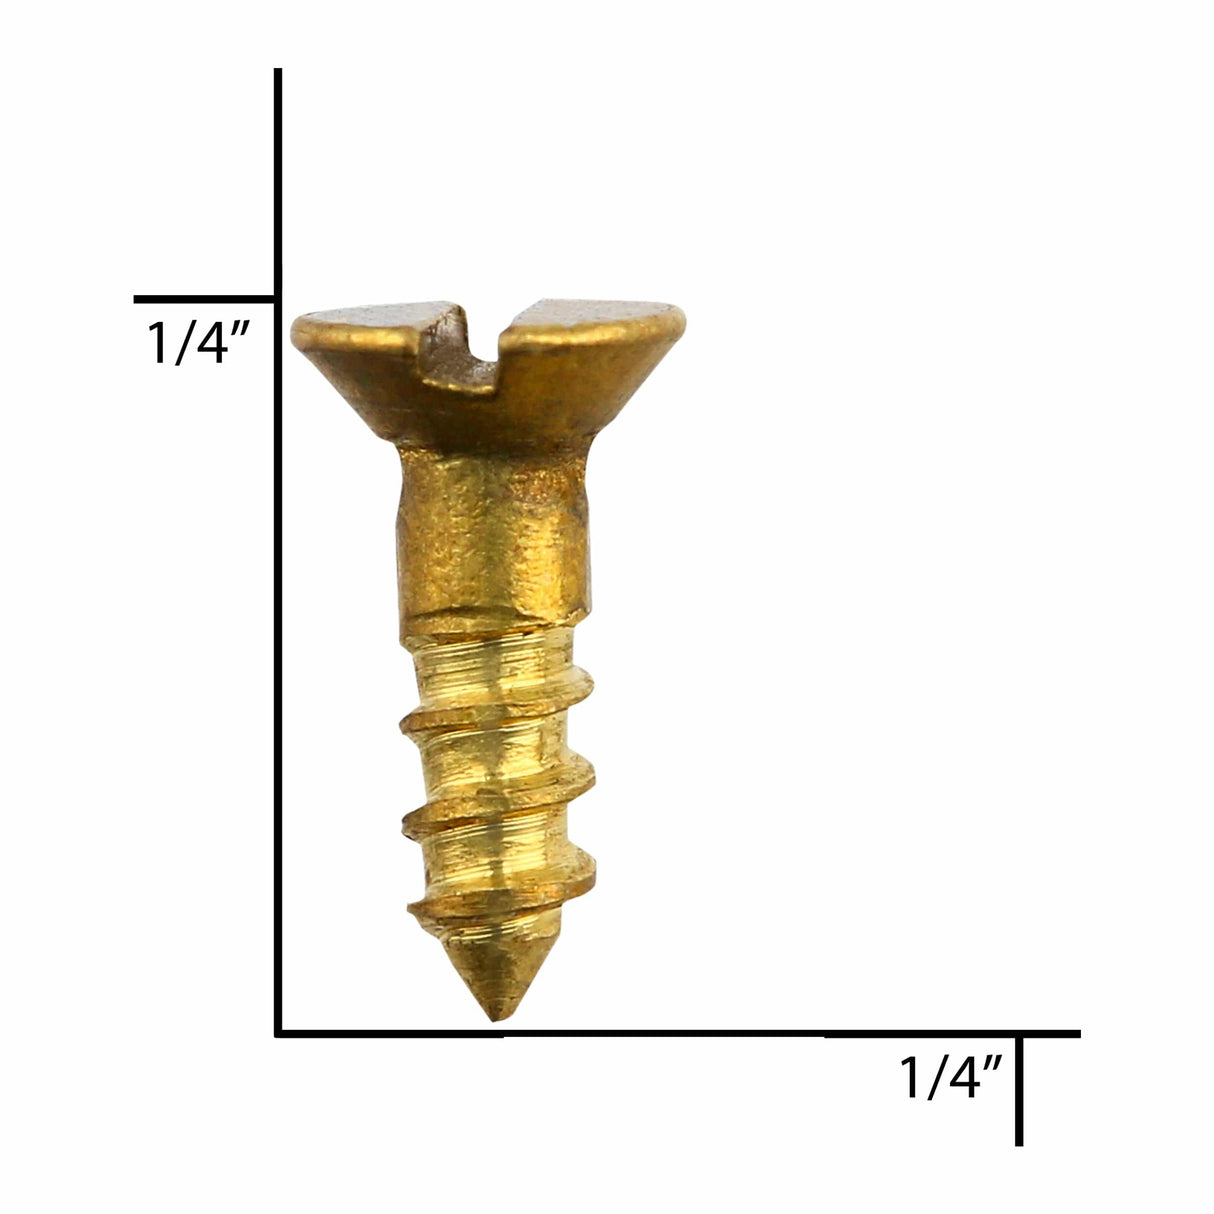 Ohio Travel Bag Fasteners 1/4" Brass, #1 Flat Round Head Wood Screw, Solid Brass, #WS-1-1-4-FH WS-1-1-4-FH